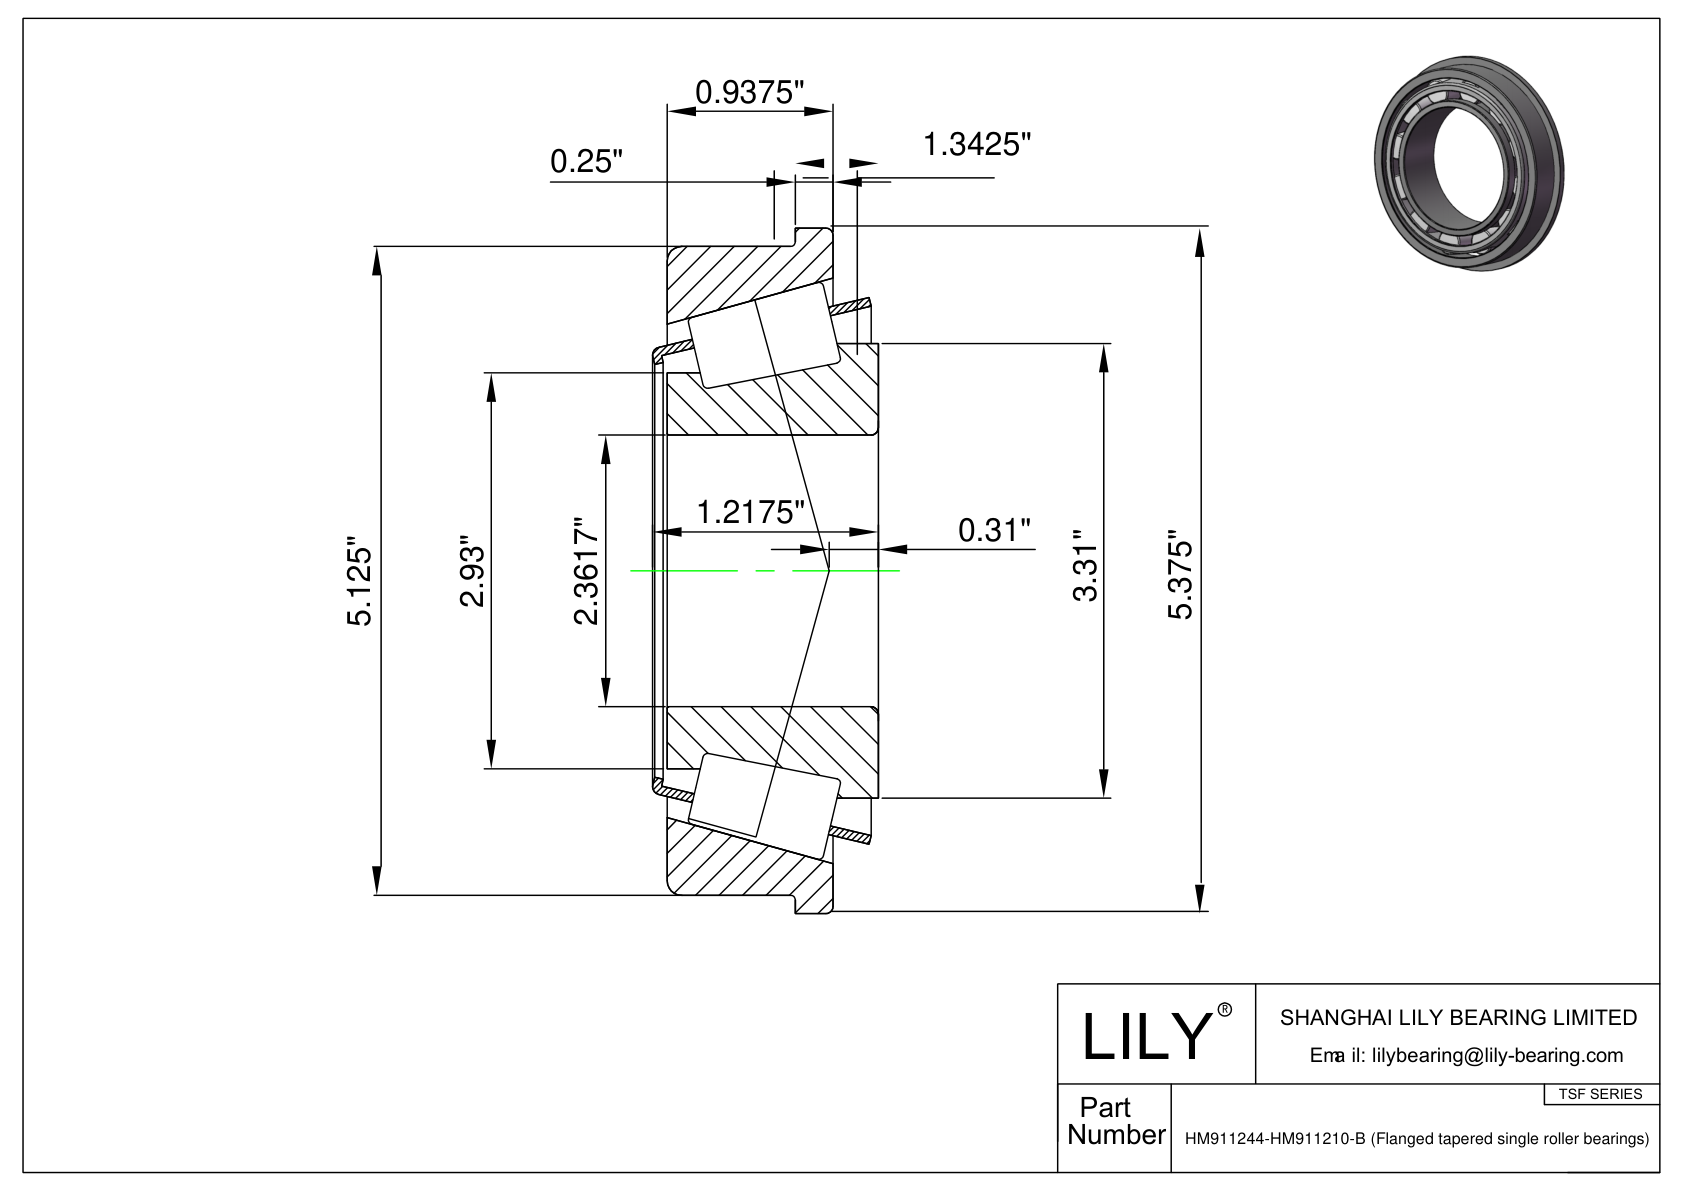 HM911244-HM911210-B TSF (Tapered Single Roller Bearings with Flange) (Imperial) cad drawing